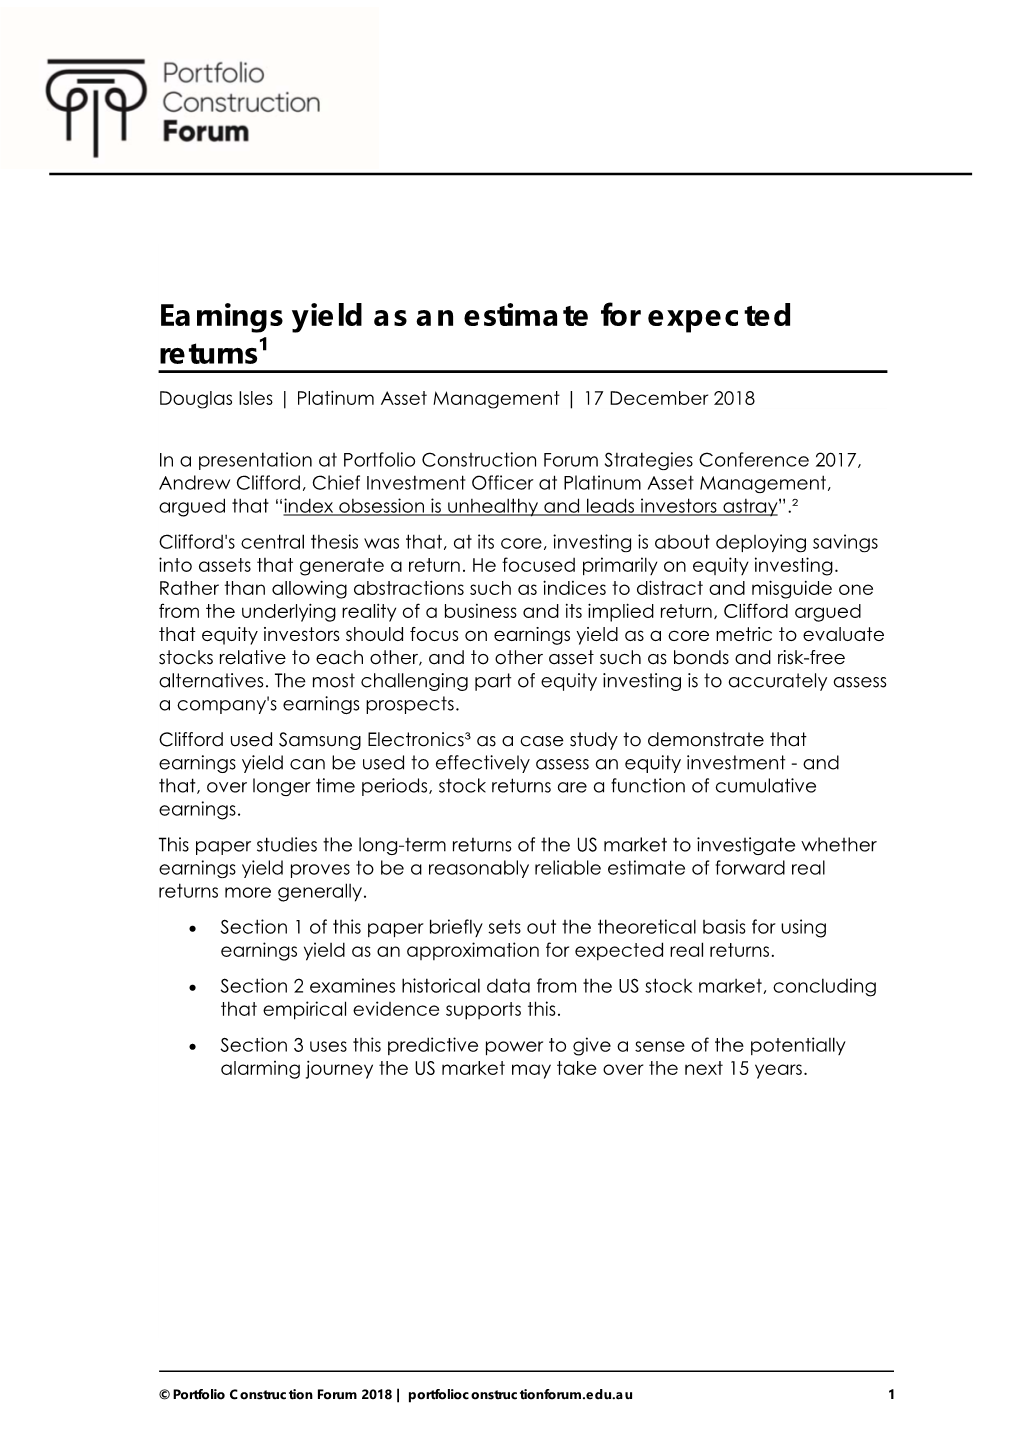 Earnings Yield As an Estimate for Expected Returns¹